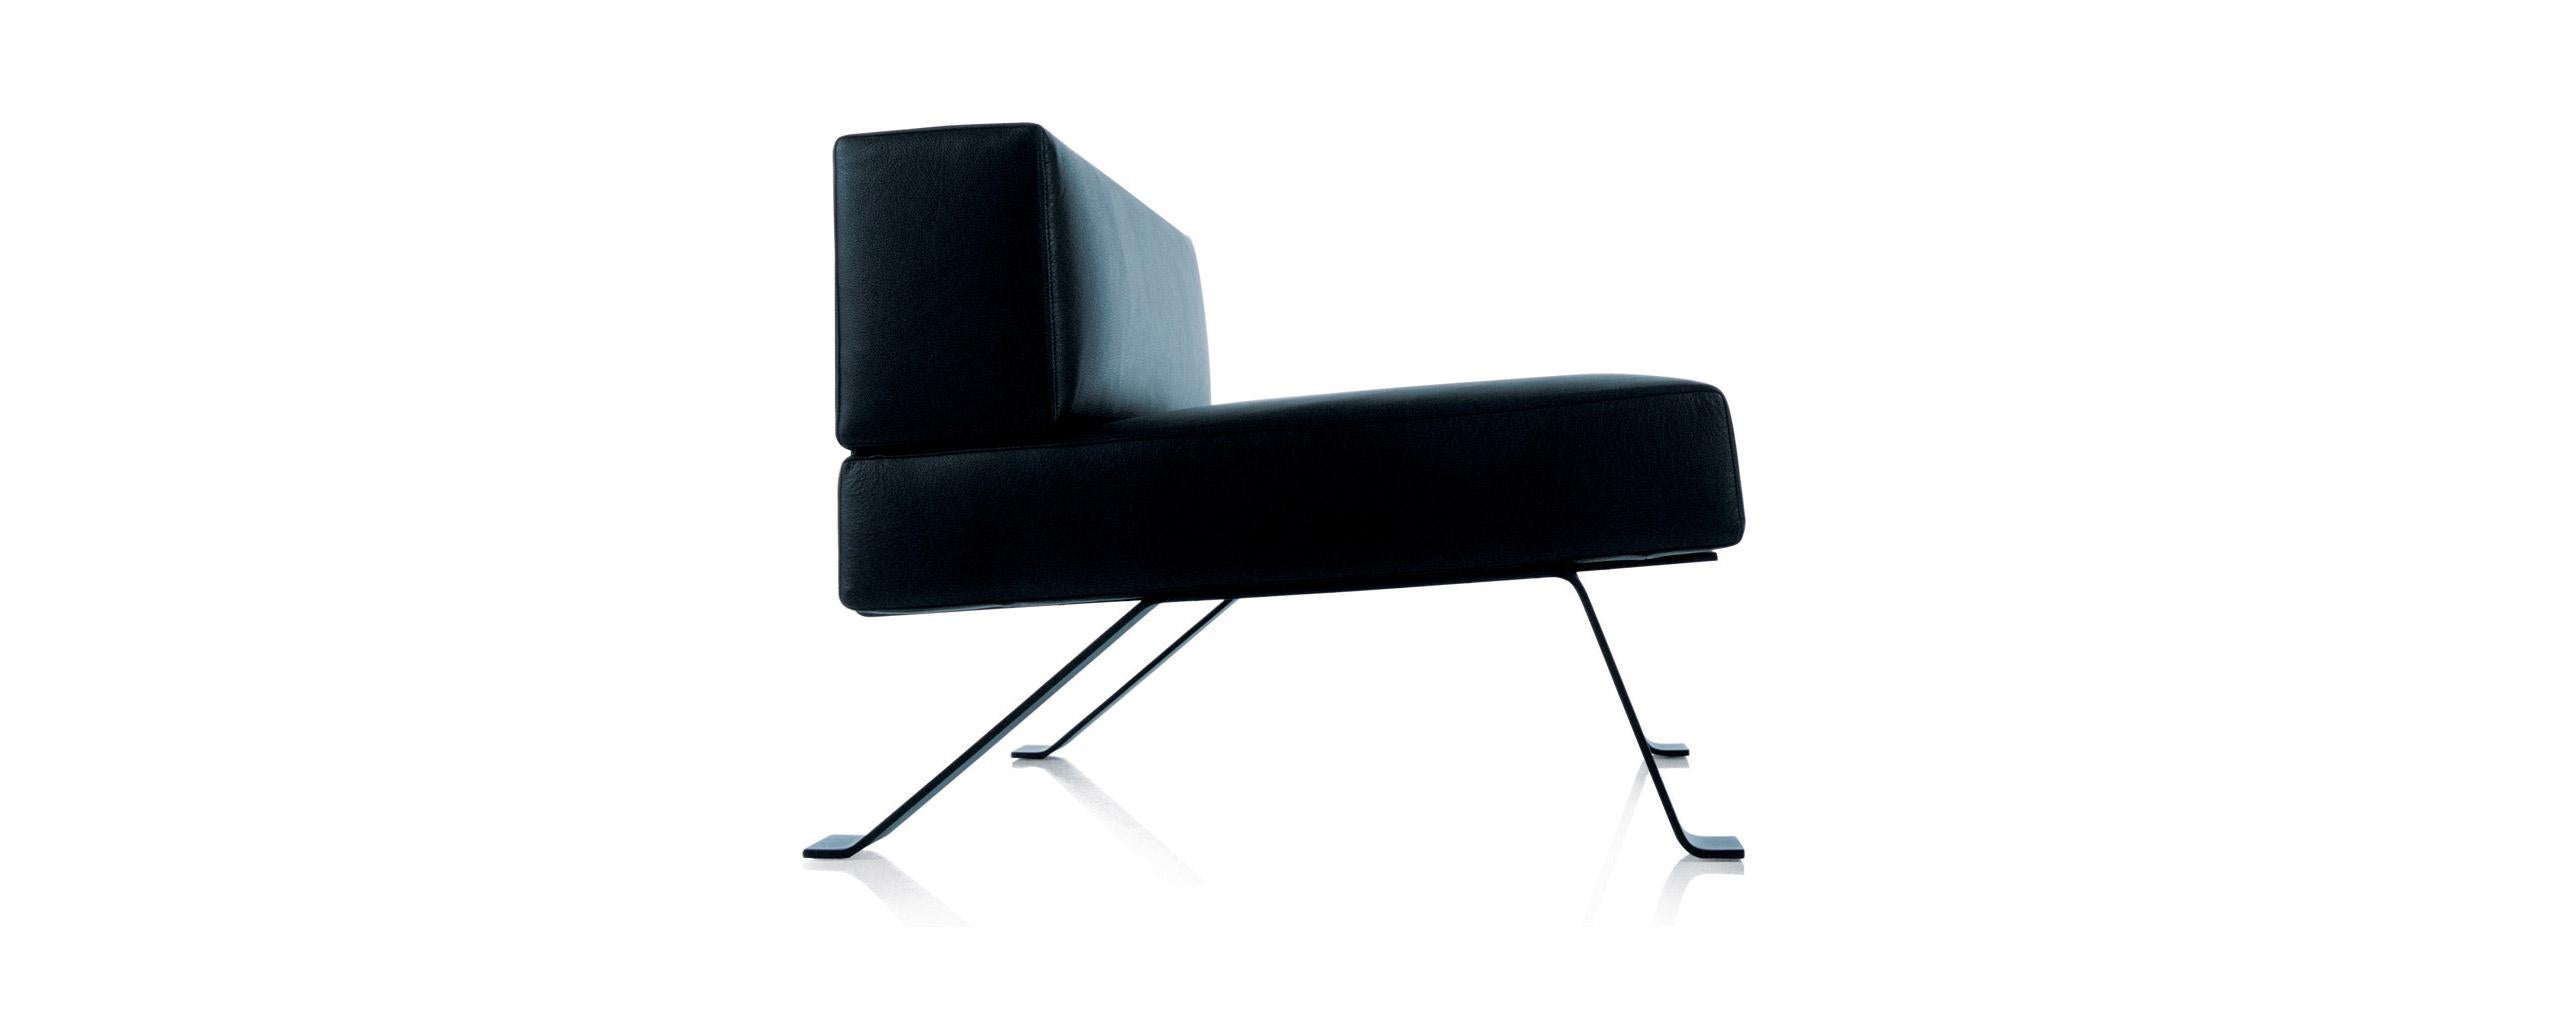 Charlotte Perriand Ombra Easychair 1